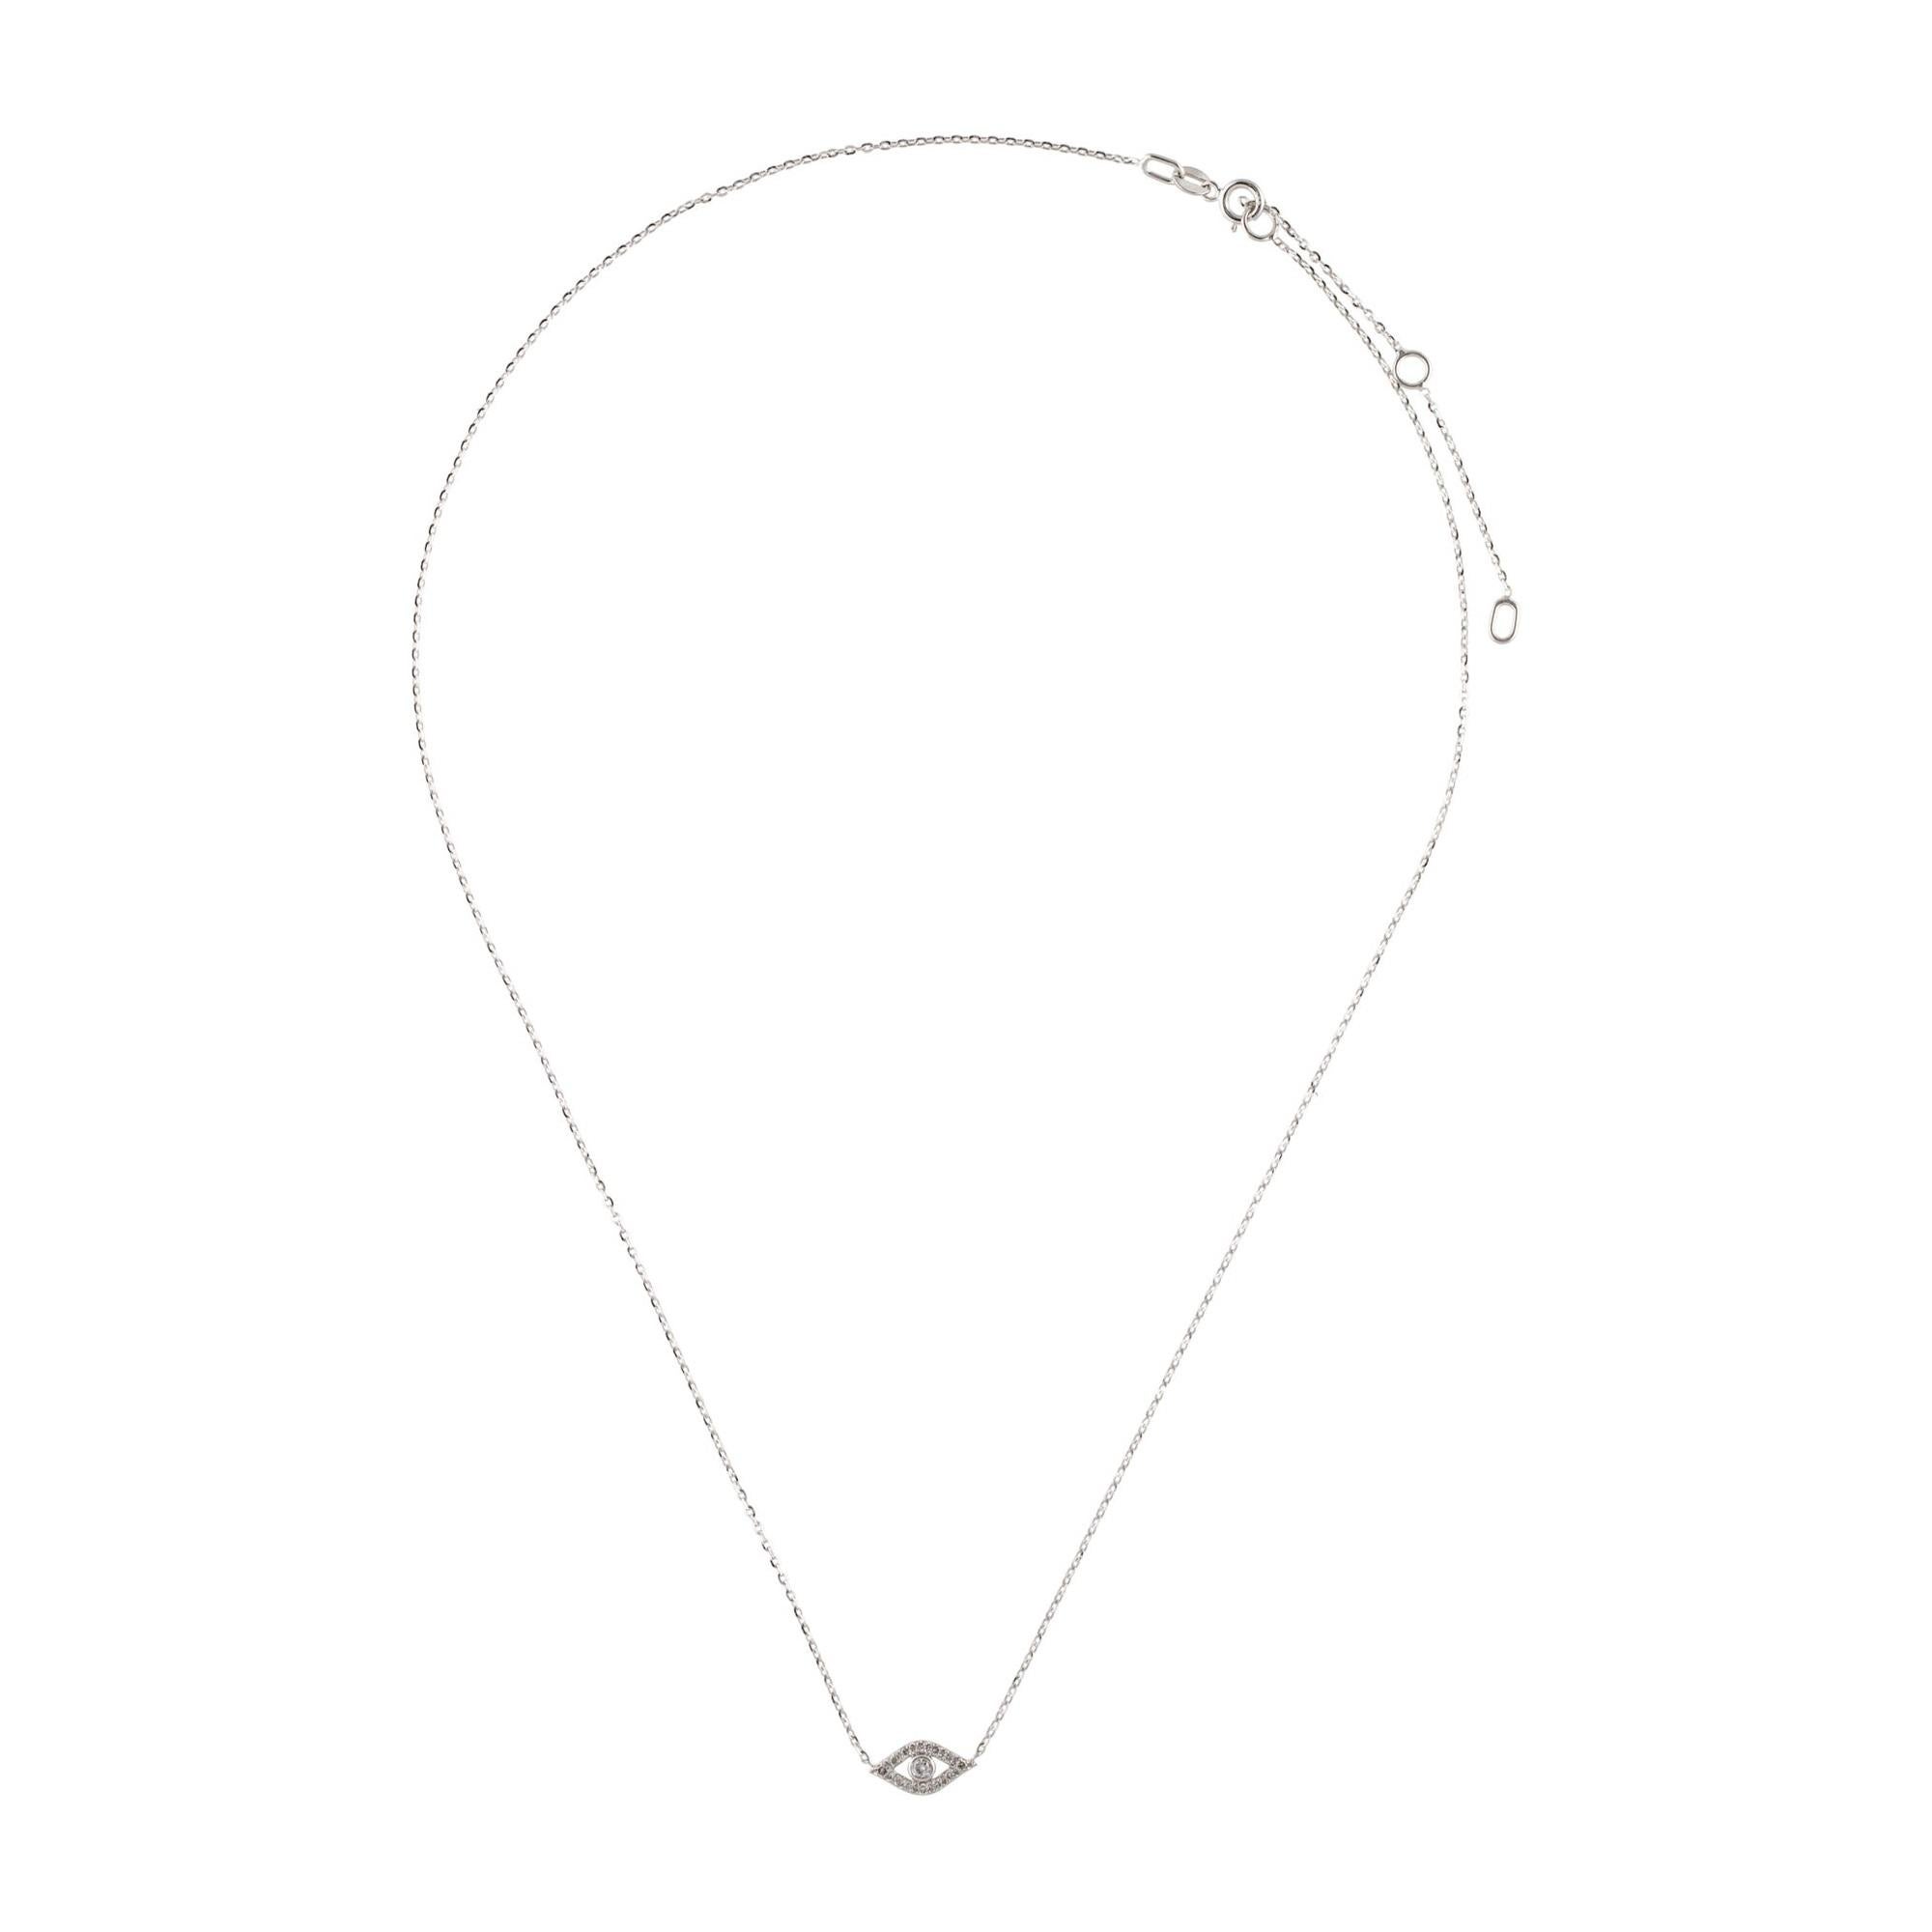 Chic and stylish, the hottest trend in jewelry fashion! Feel protected by this stunning Diamond Evil Eye Necklace featuring approximately 0.08 ct of sparkling white round diamonds. Crafted of 14K Gold/. Chain is adjustable to 16